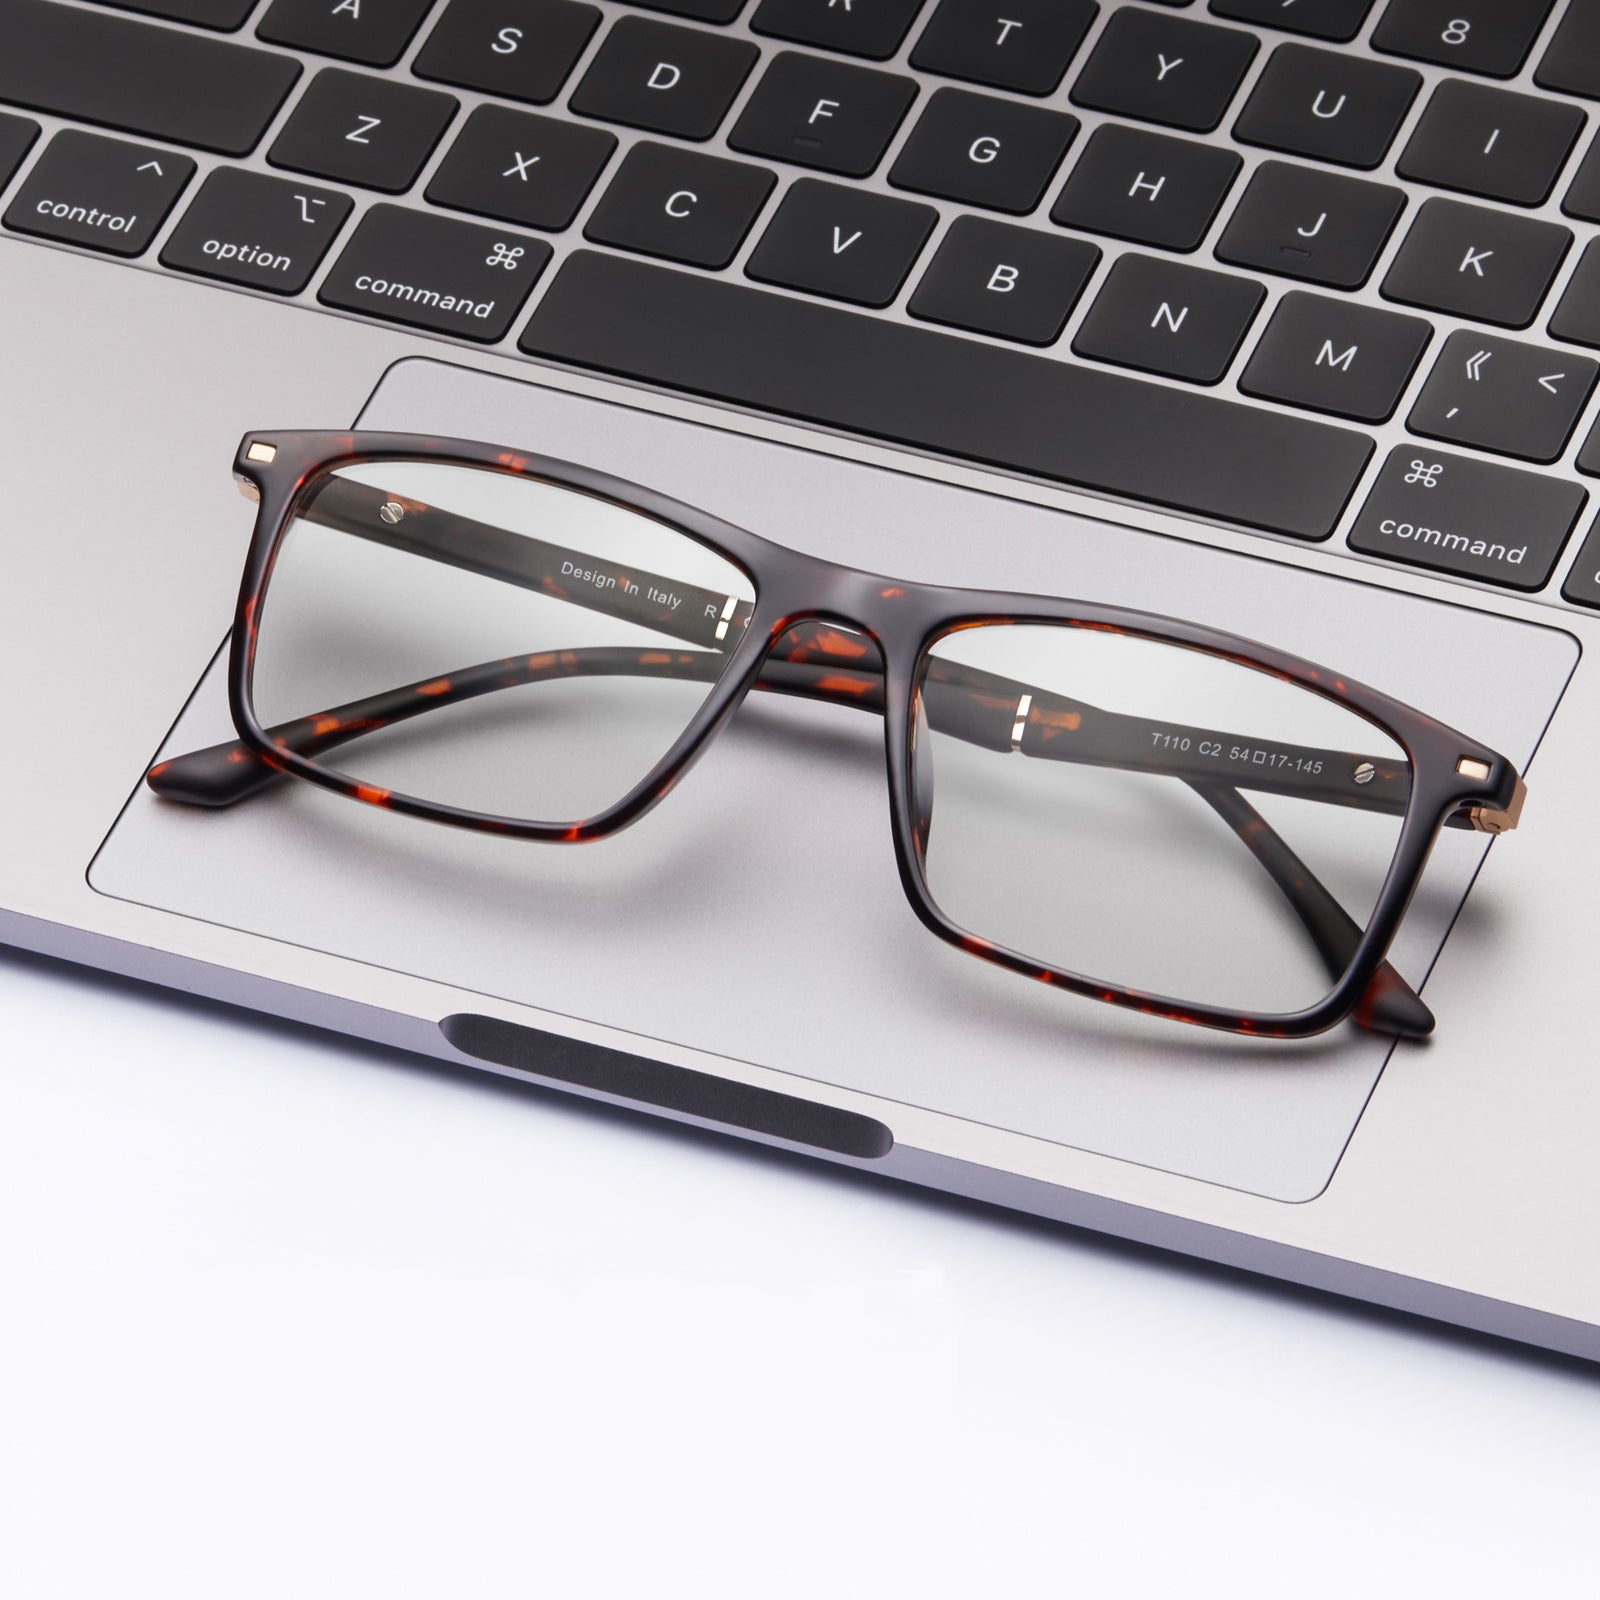 How to Choose Eyeglass Frames and Lenses? What Knowledge or Tips Are There?